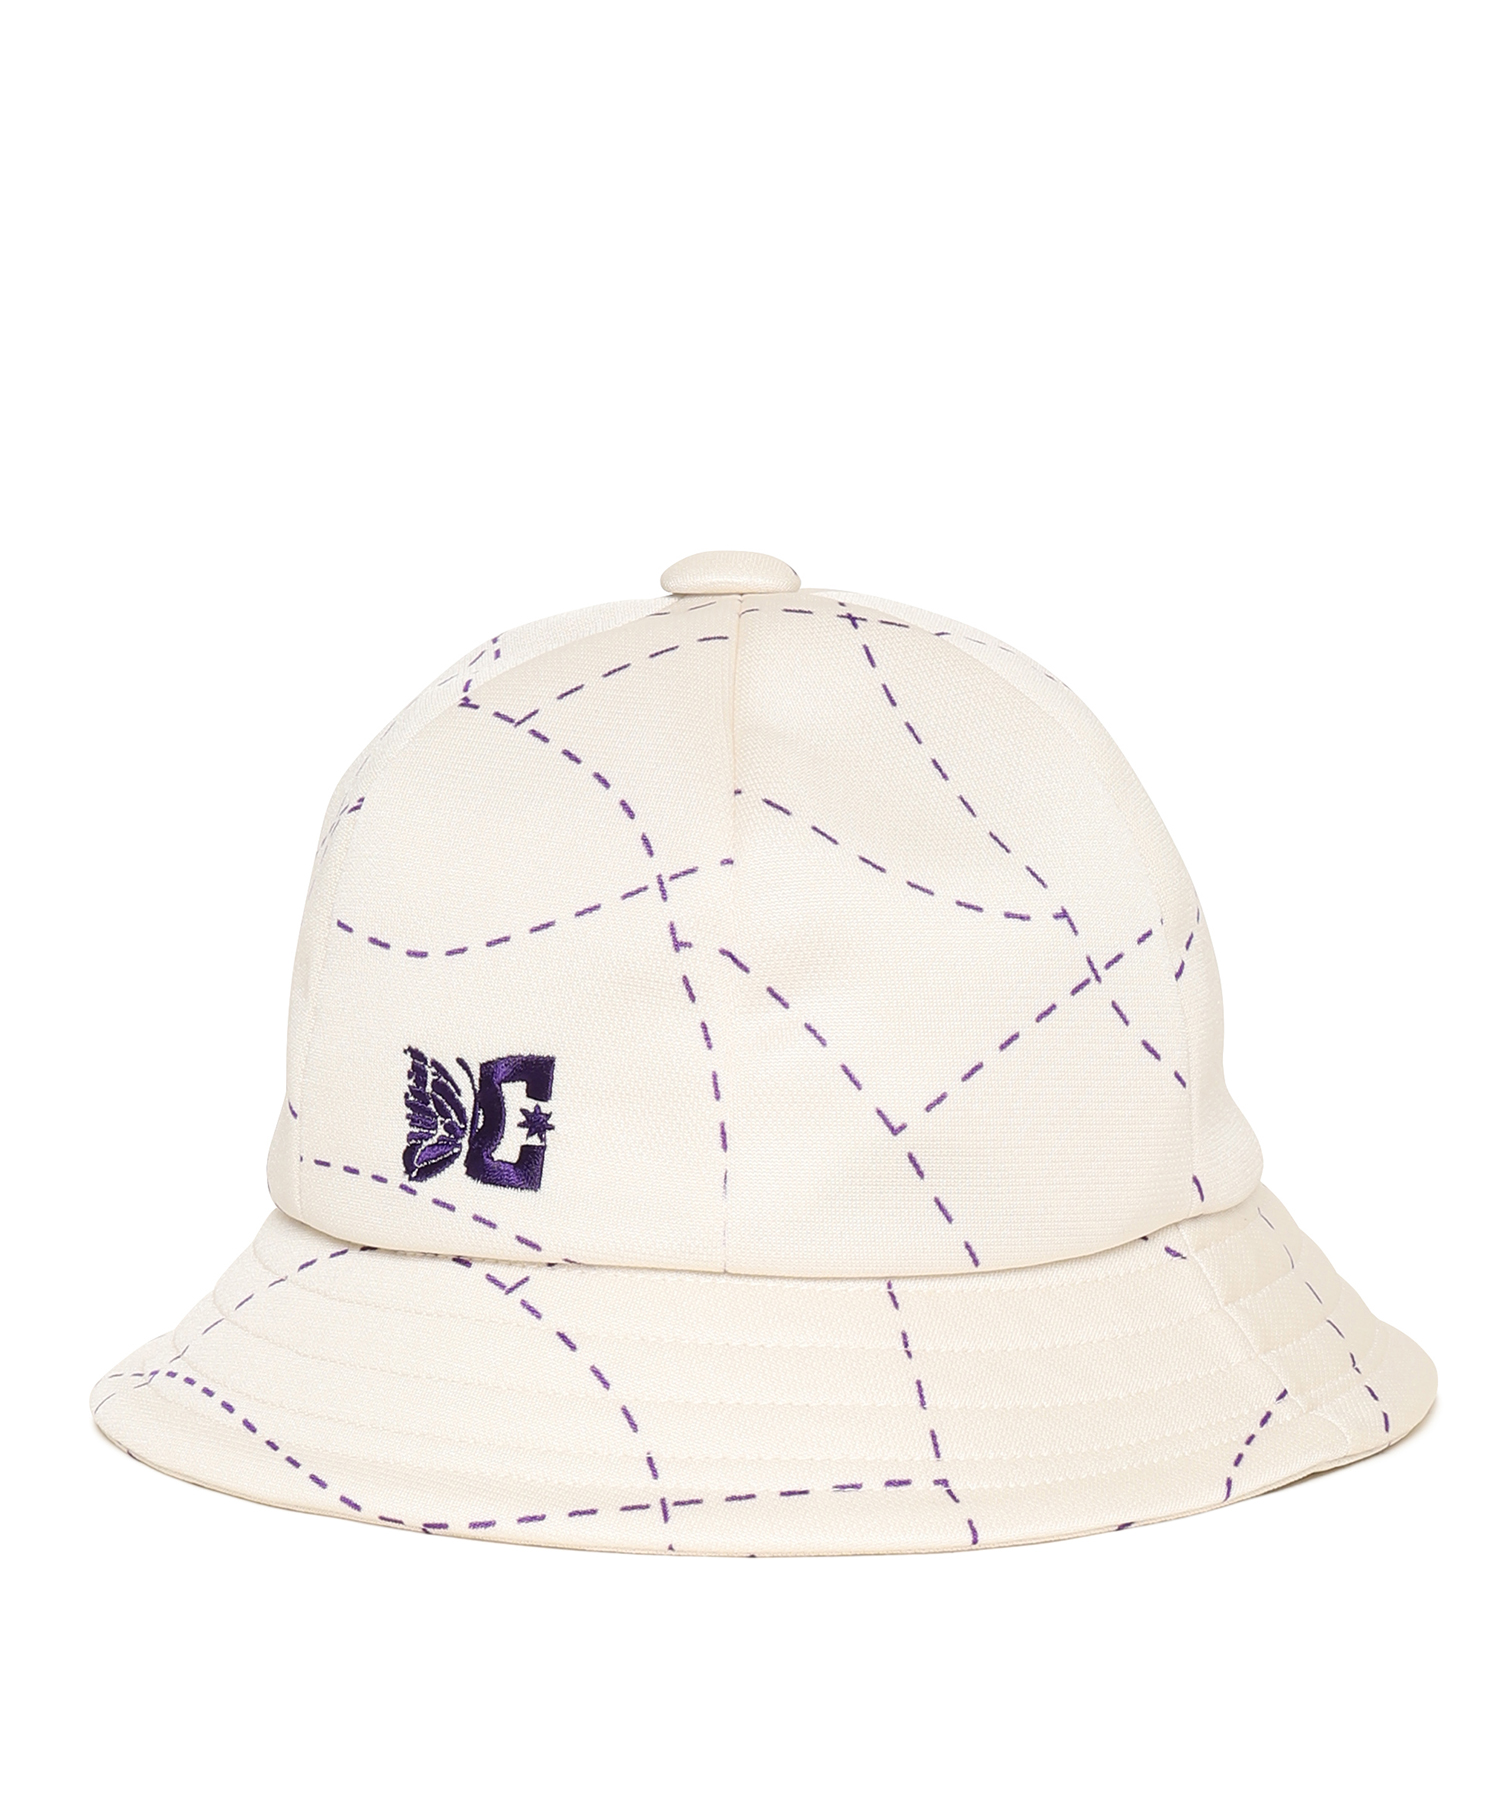 NEEDLES x DC SHOES Bermuda Hat - Poly Smooth / Printed 